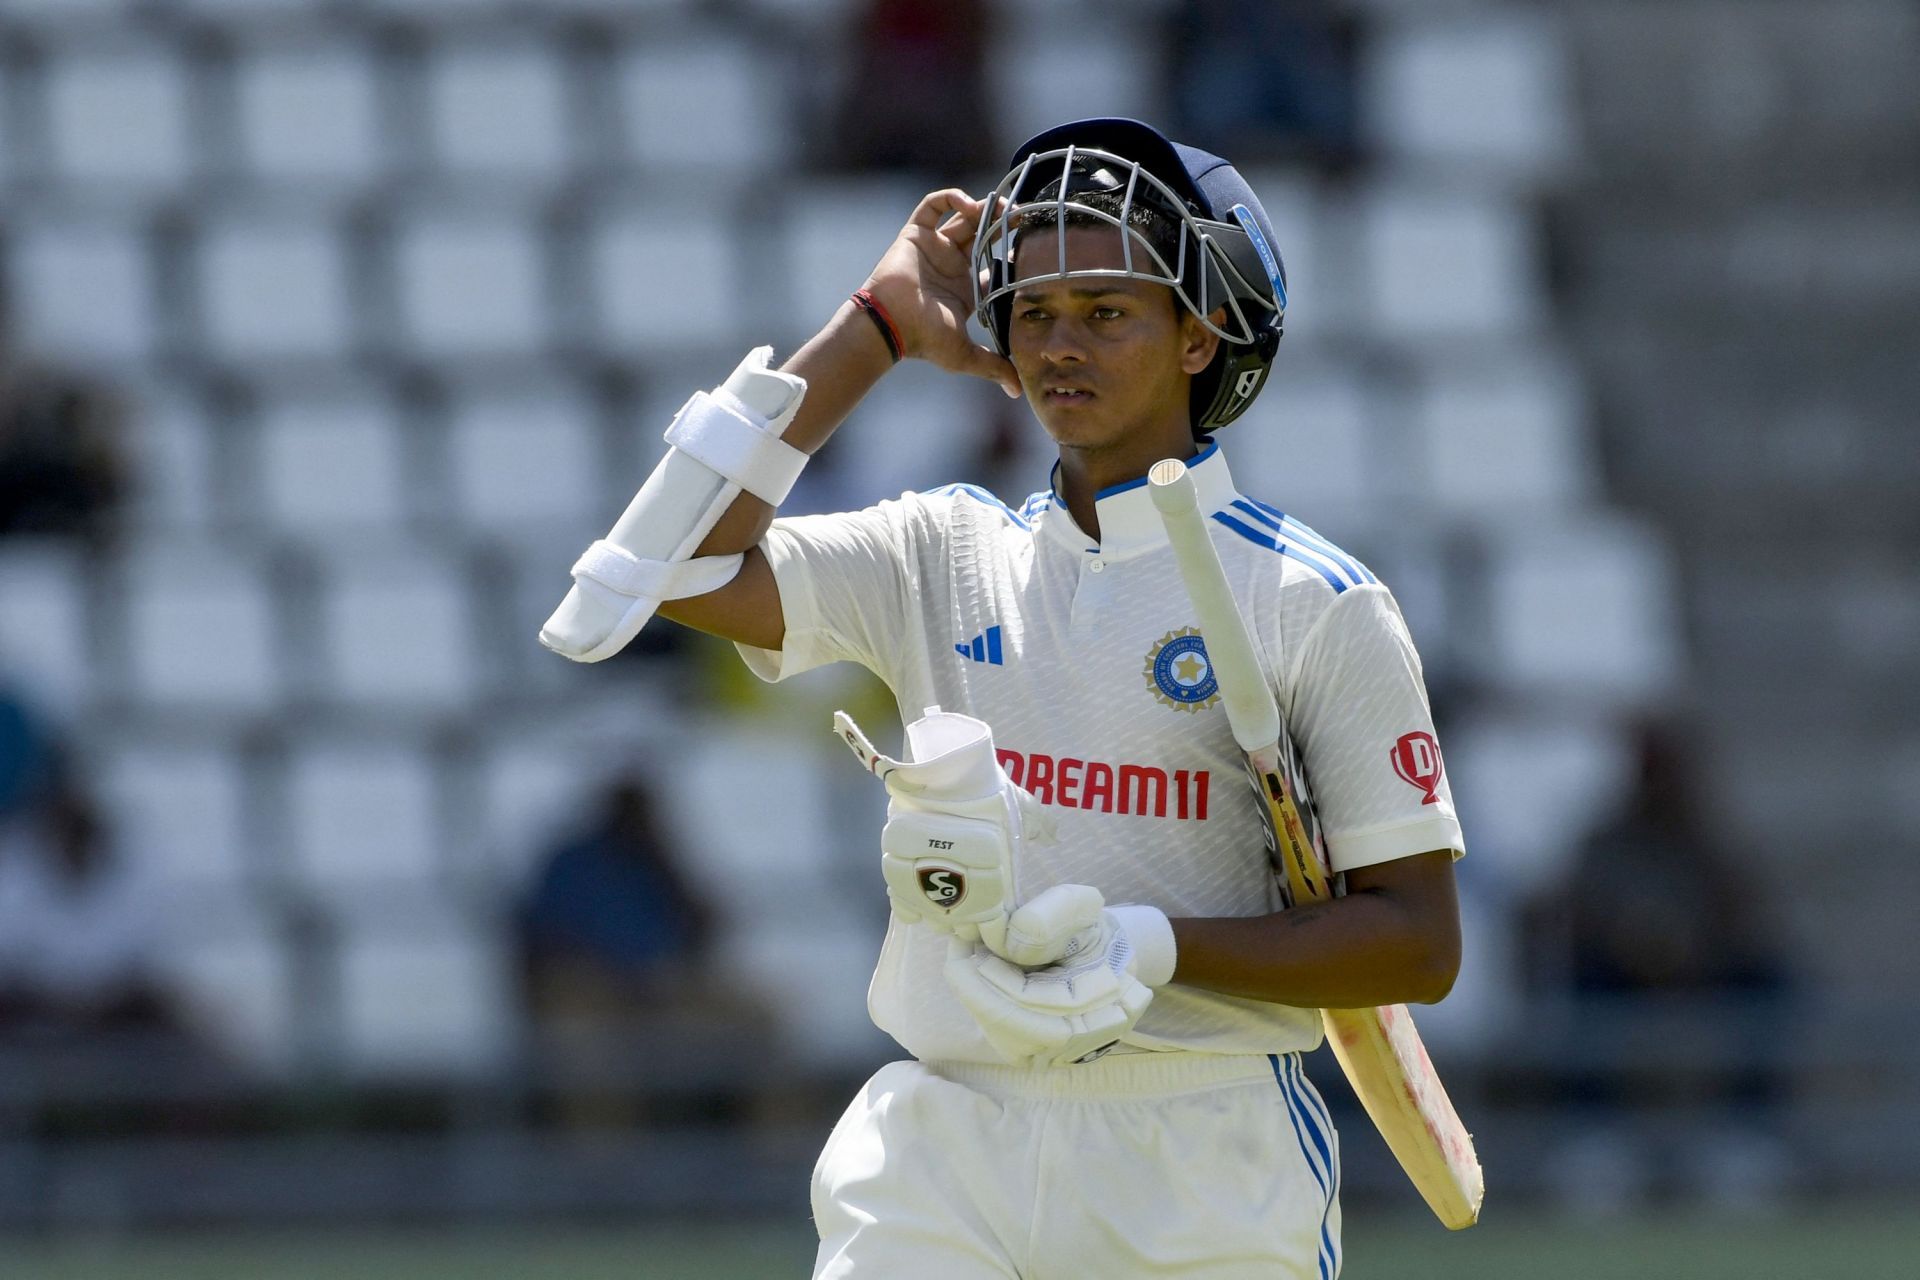 Yashasvi Jaiswal faced the third-most number of deliveries (387) on Test debut